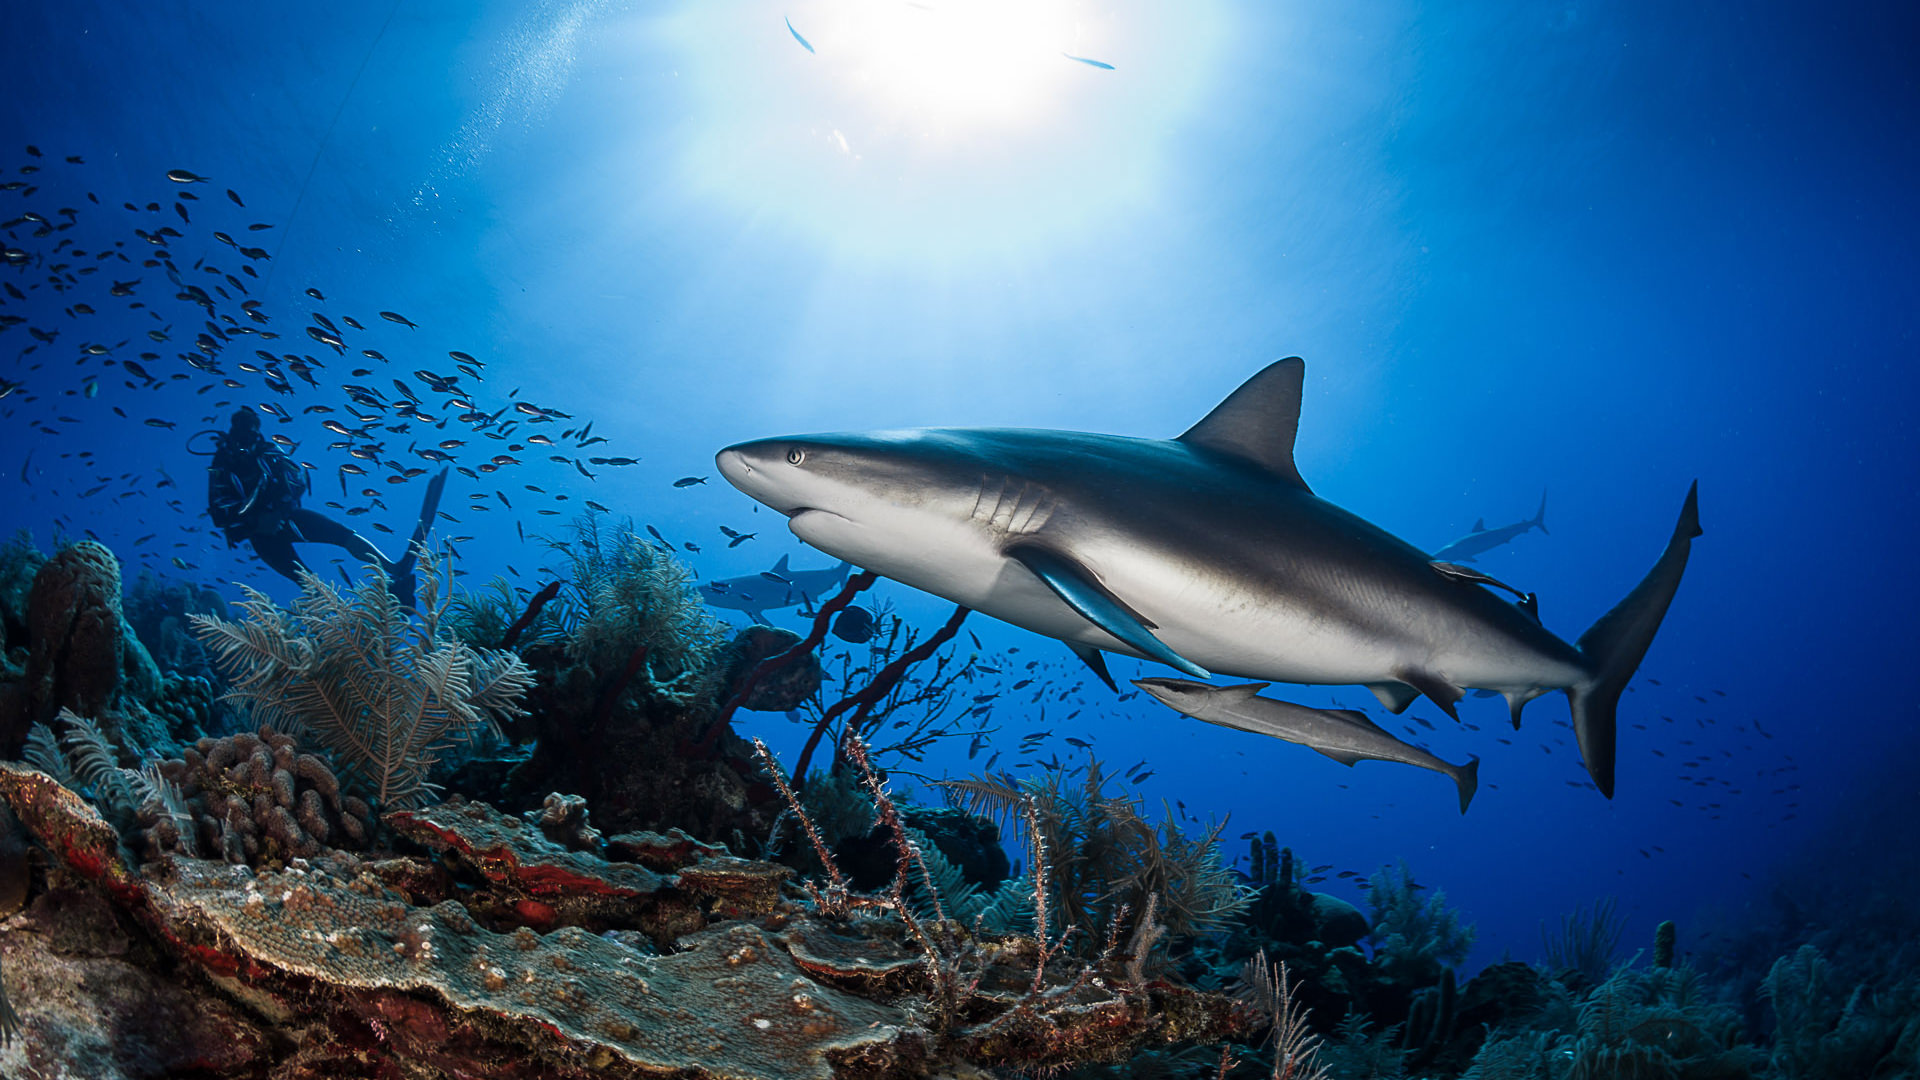 A shark cruises along a reef at Jardines de la Reina in Cuba, one of the world's best scuba diving destinations in March